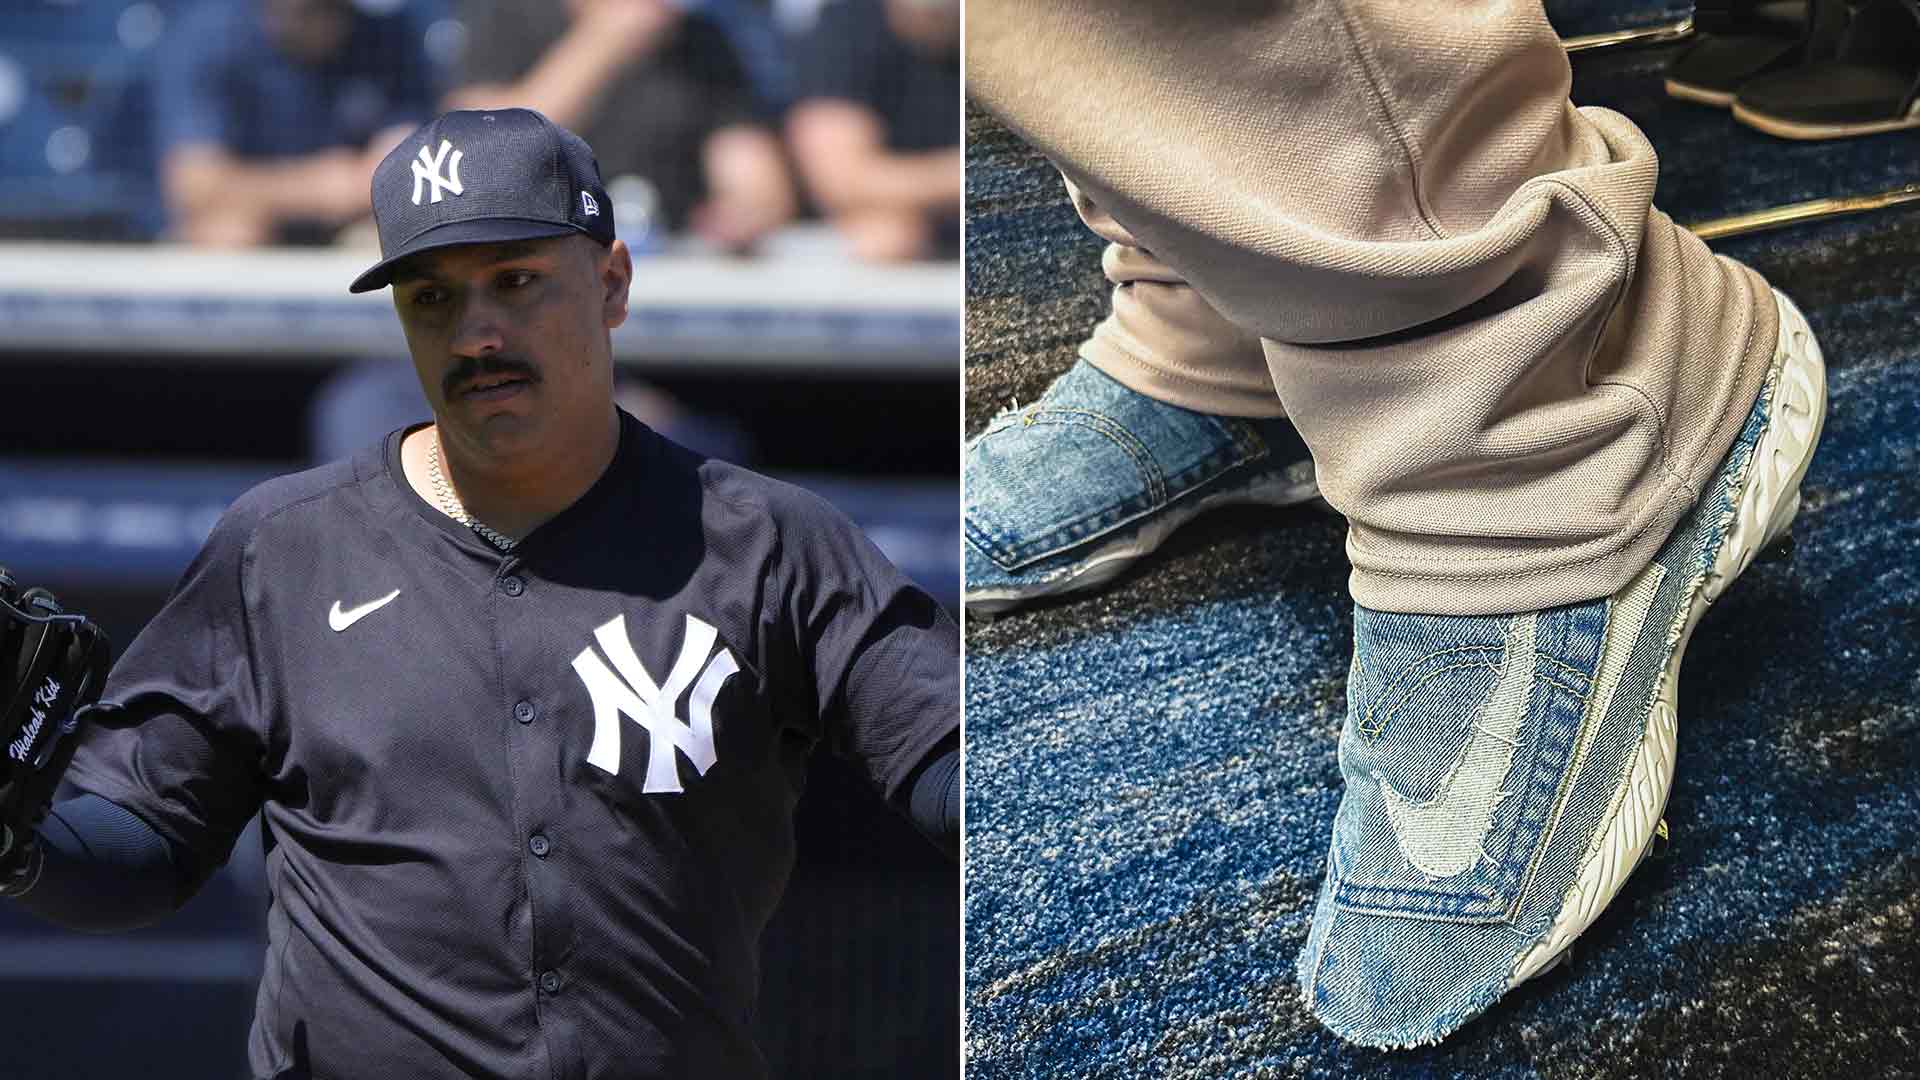 A split photo of Nestor Cortes and his denim cleats